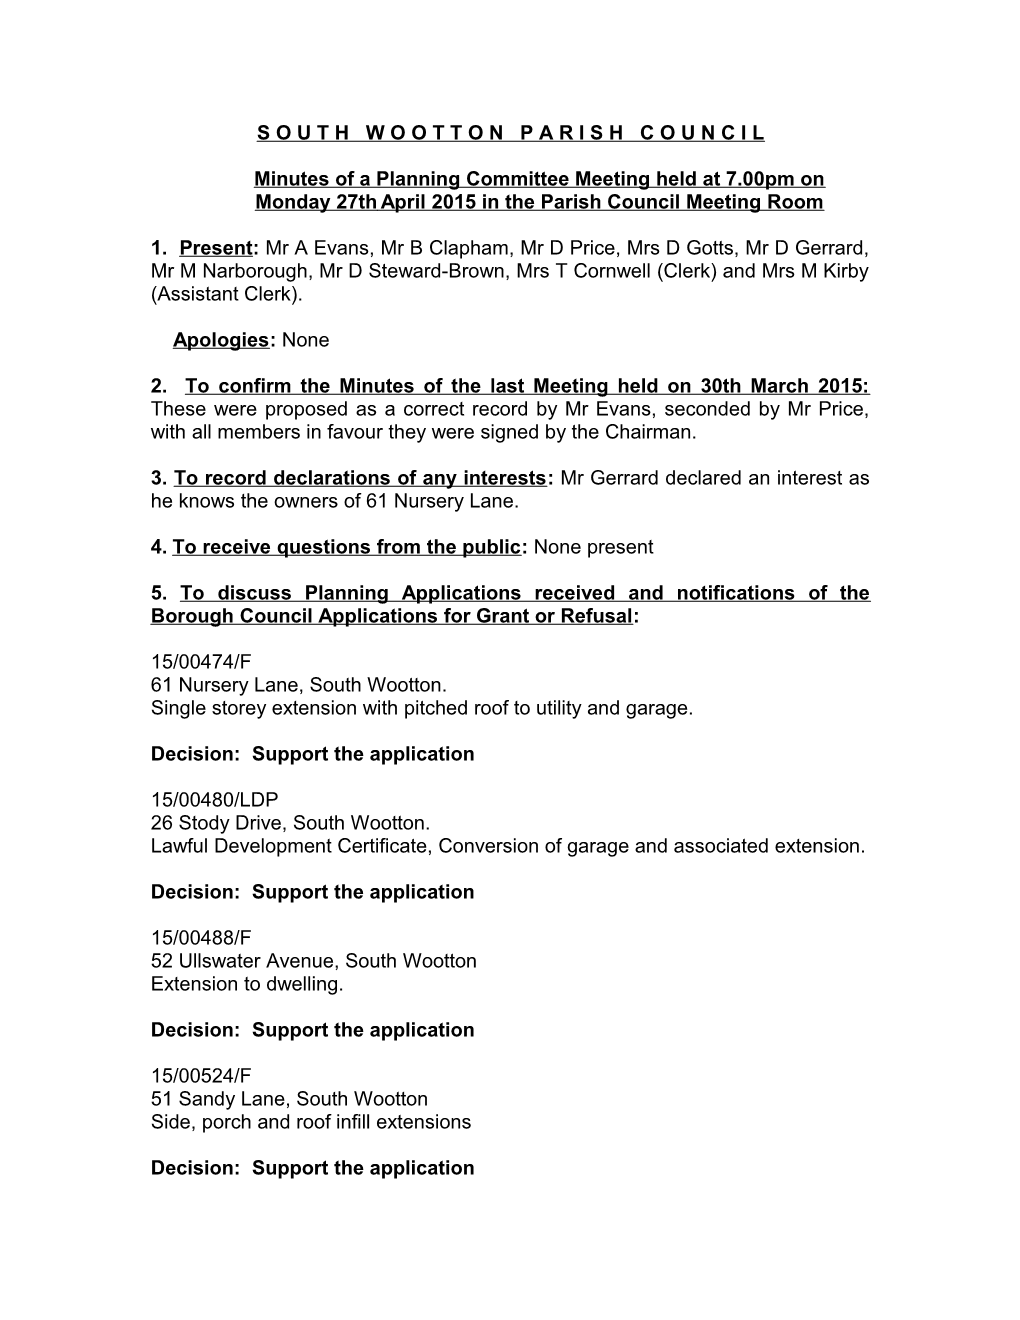 Minutes of a Planning Committee Meeting Held at 7.00Pm on Monday 27Thapril2015 in The